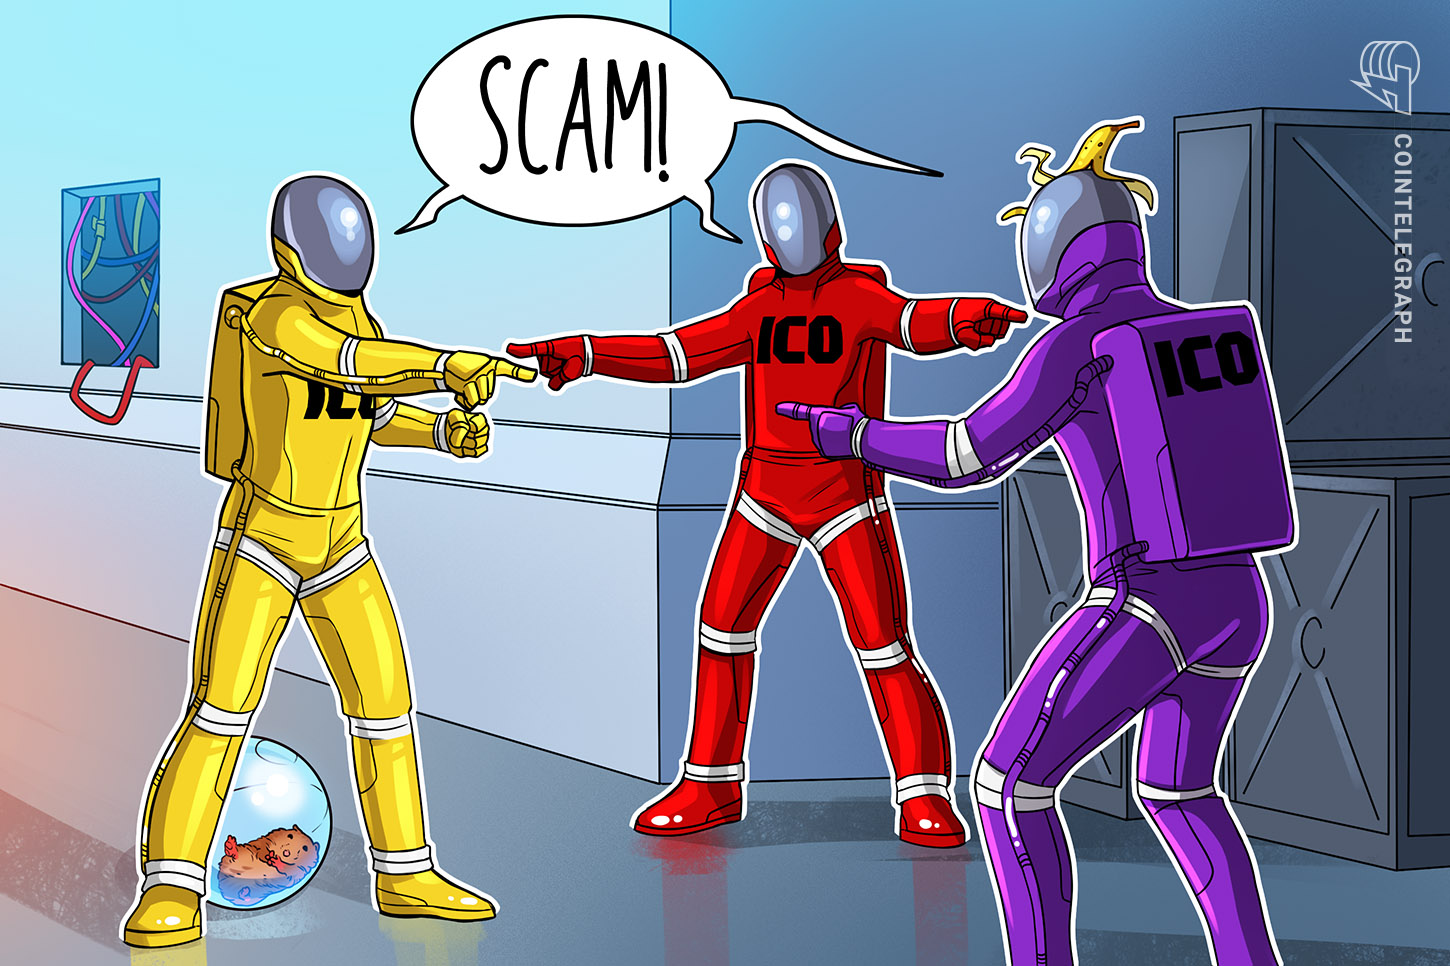 Did you fall for it? 13 ICO scams that fooled hundreds